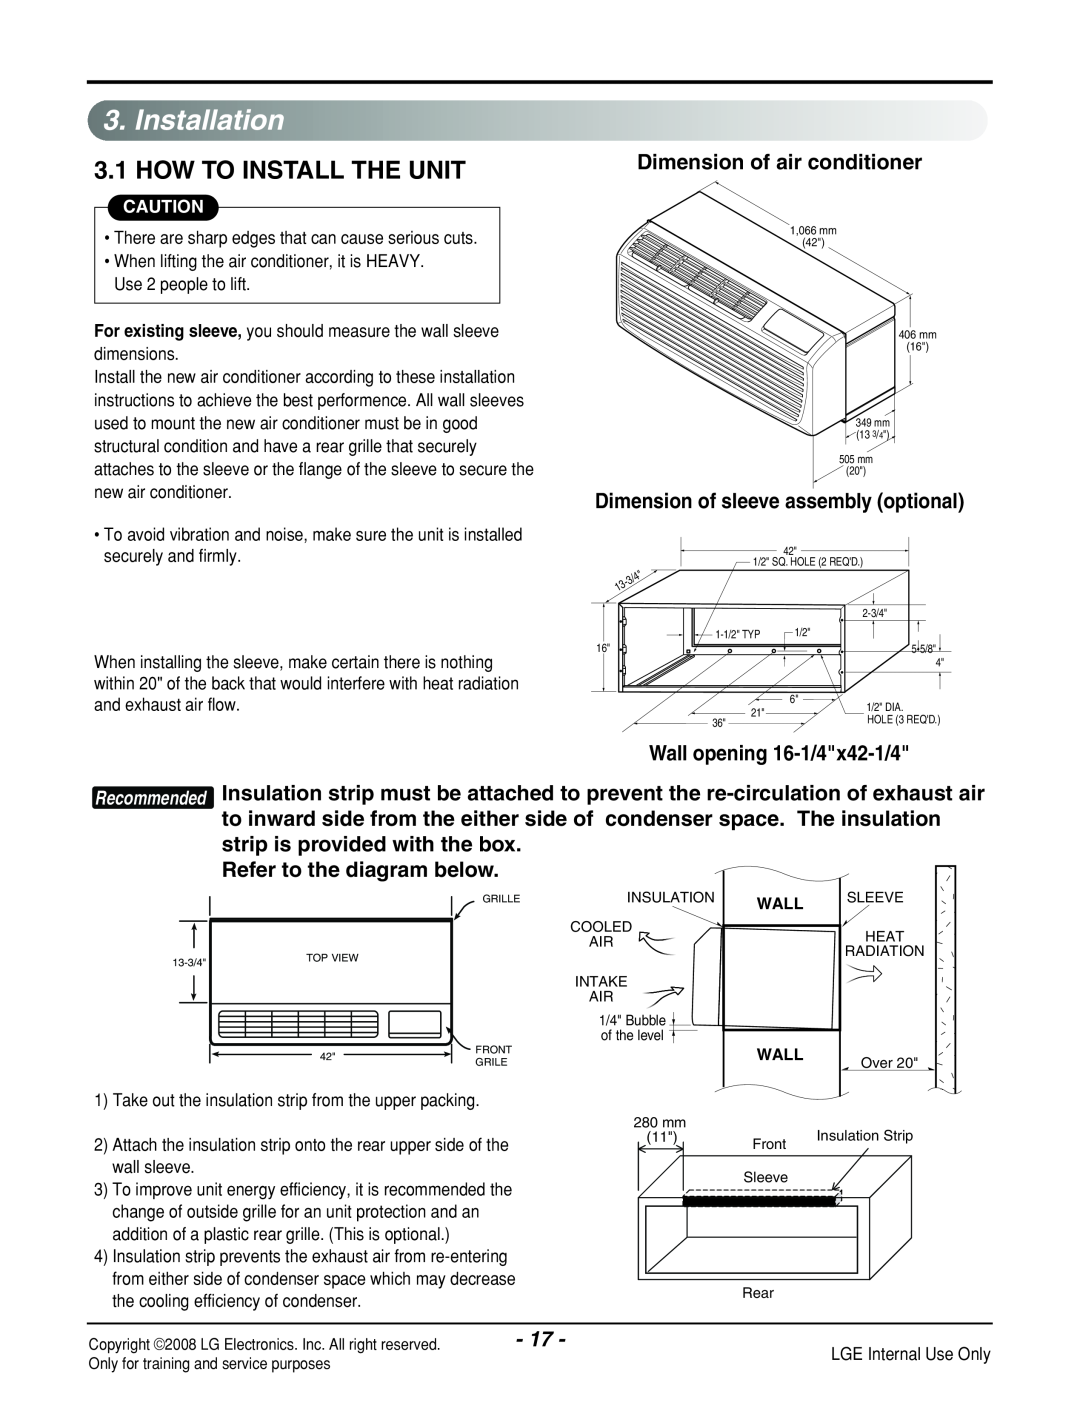 LG Electronics LP121CEM-Y8 Installation, How To Install The Unit, Dimension of air conditioner, Wall opening 16-1/4x42-1/4 